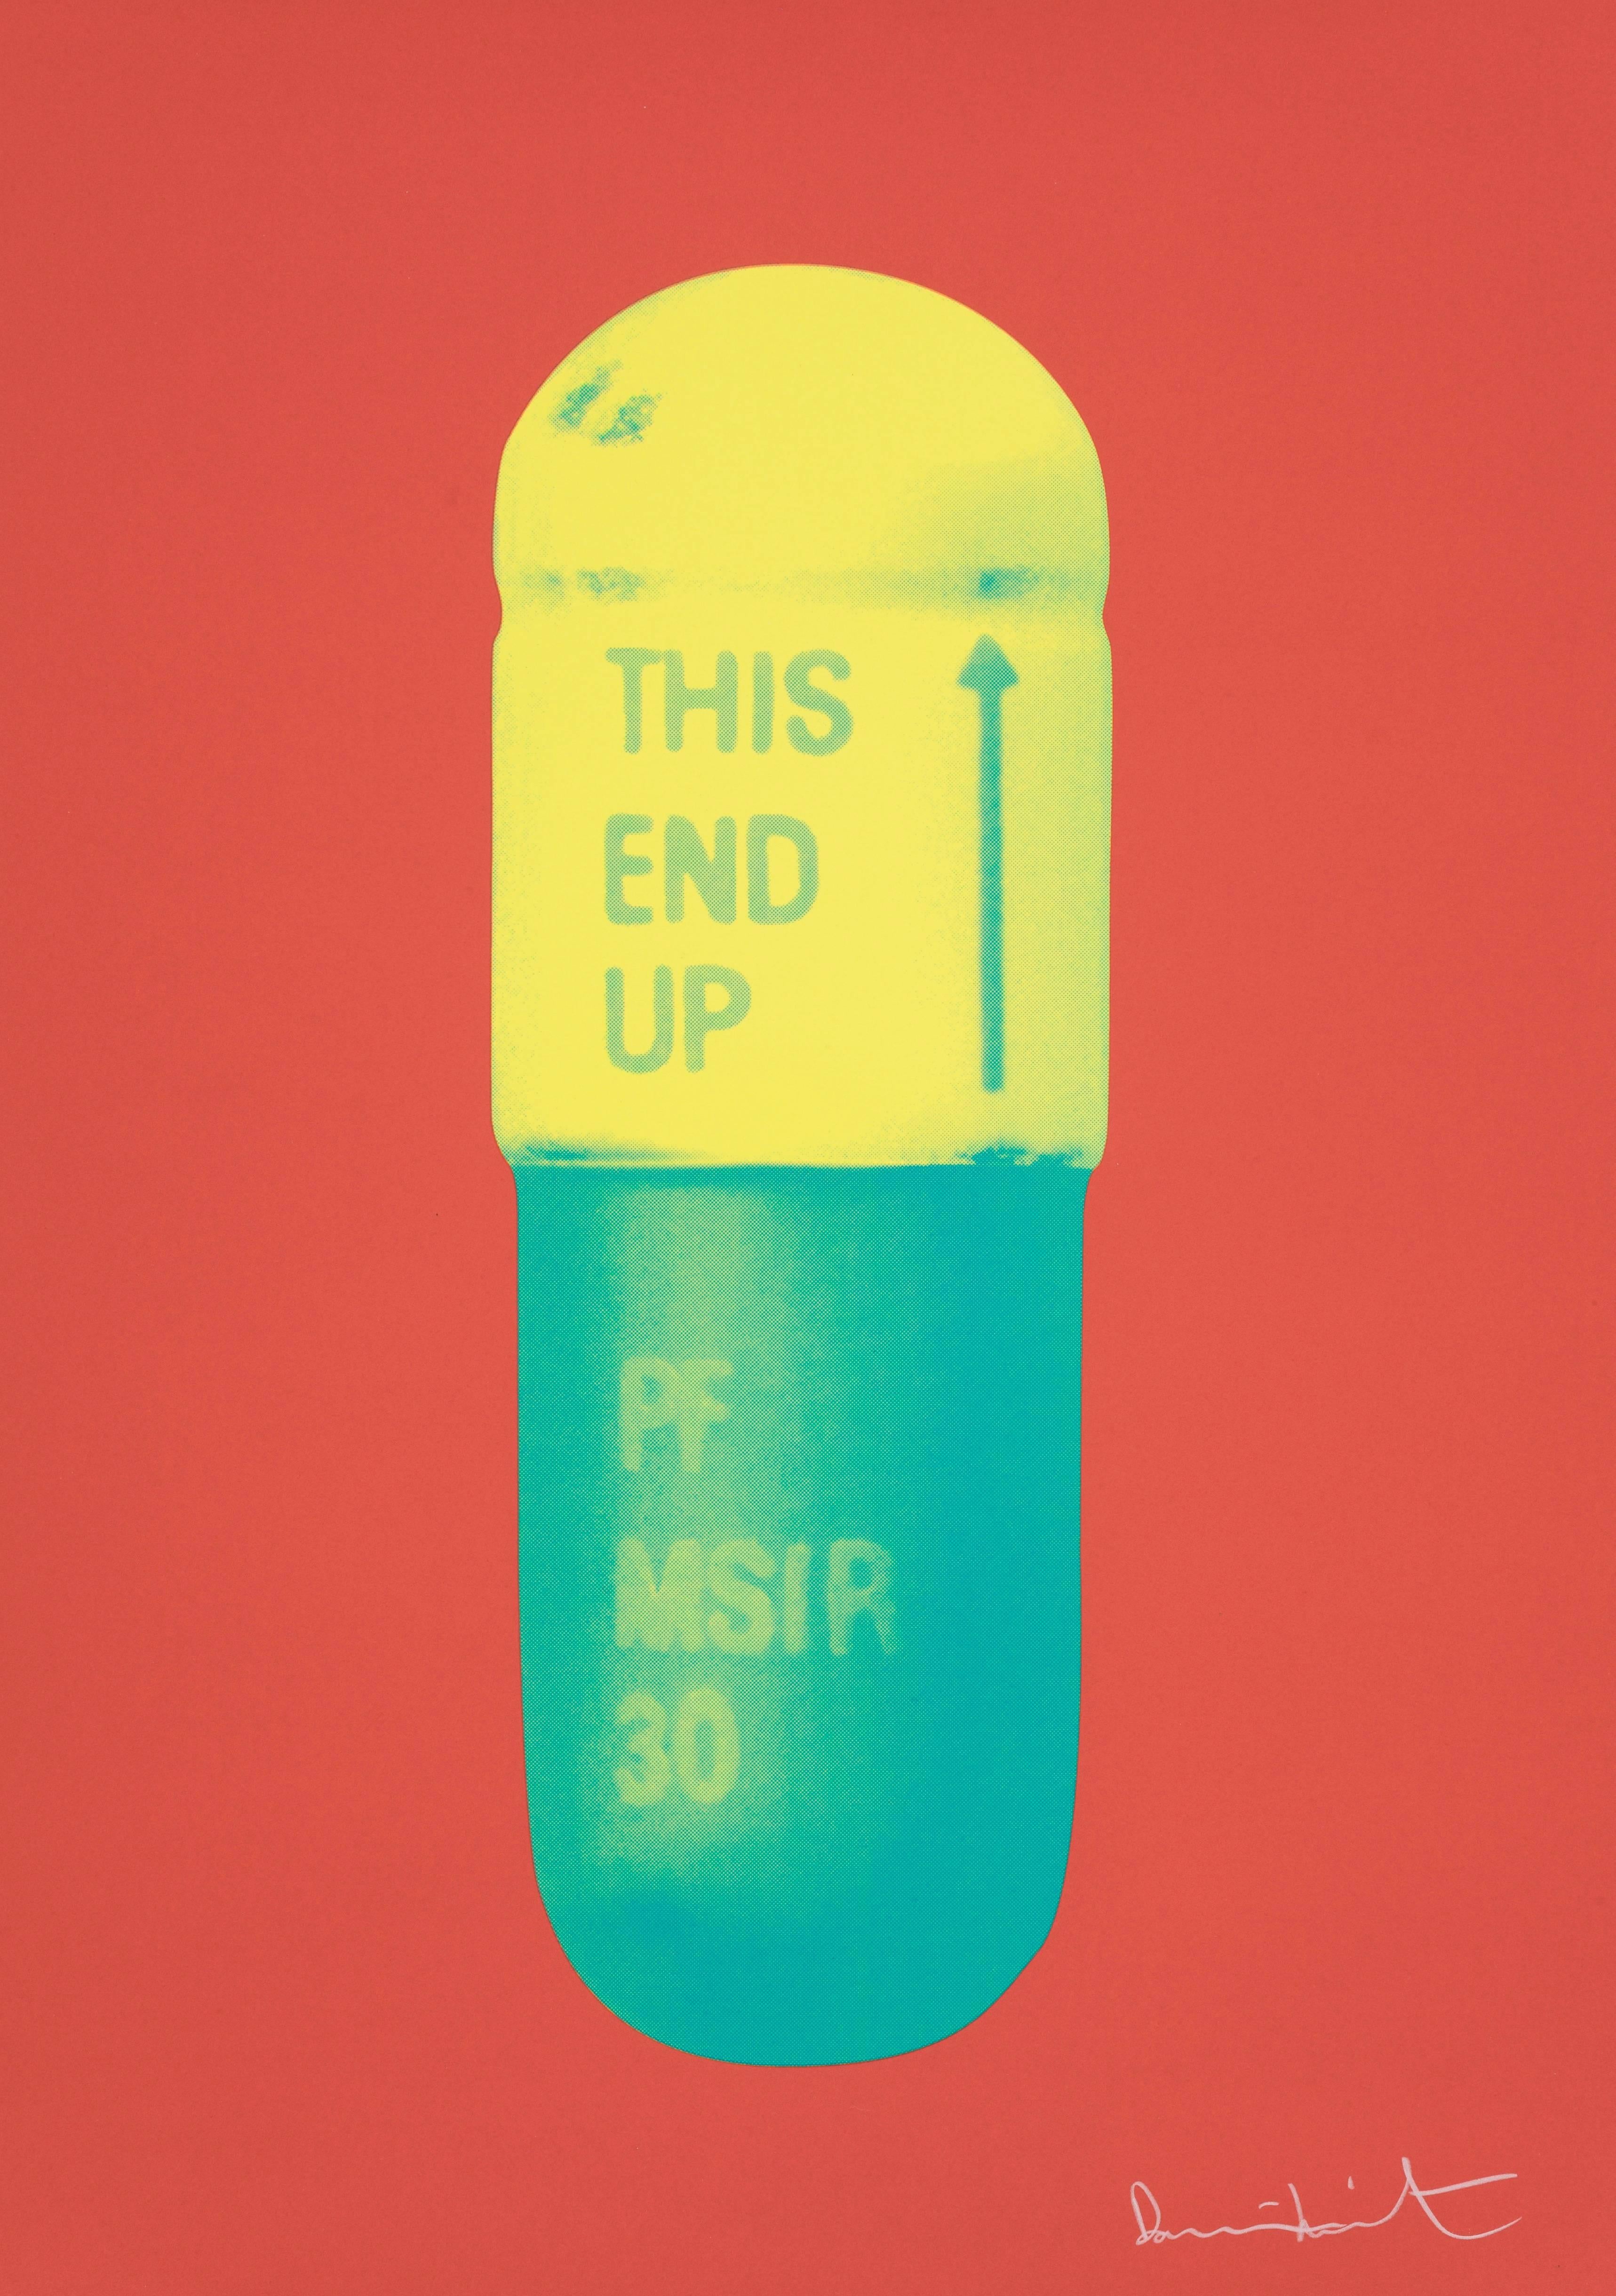 The Cure - Coral/Lemon Yellow/Turquoise  - Print by Damien Hirst